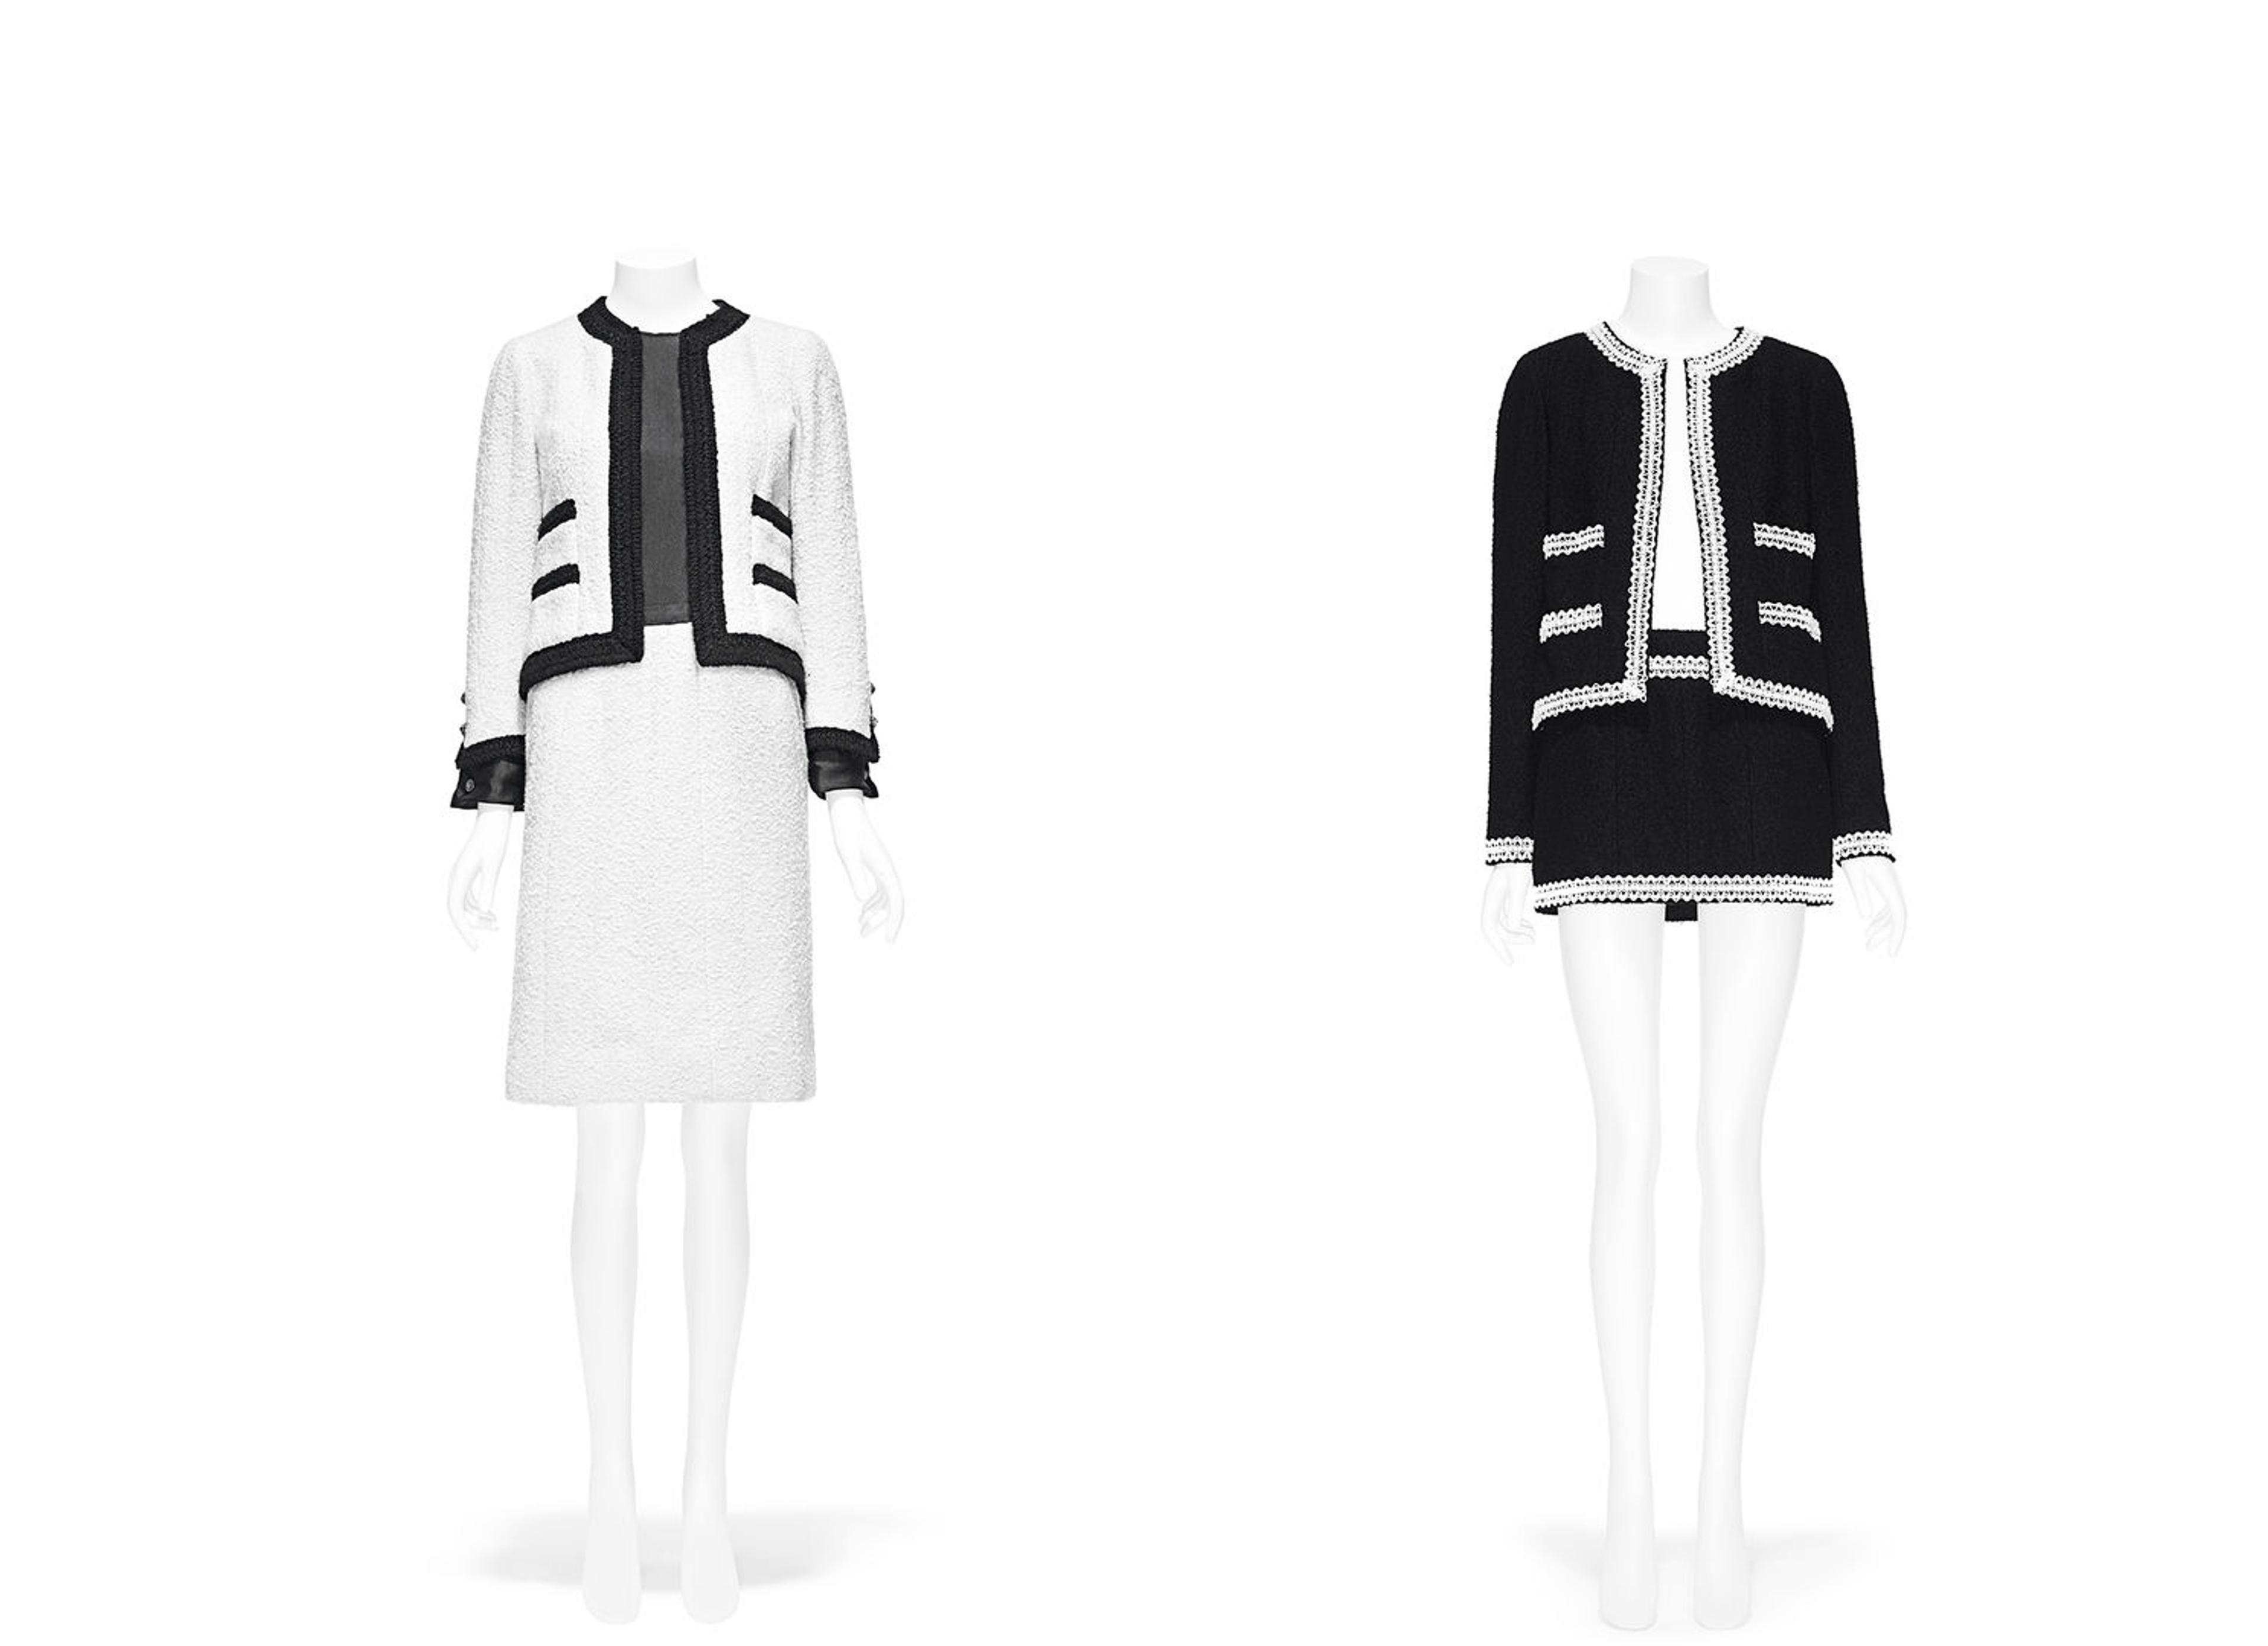 Two Chanel ensembles from About Time: Fashion and Duration